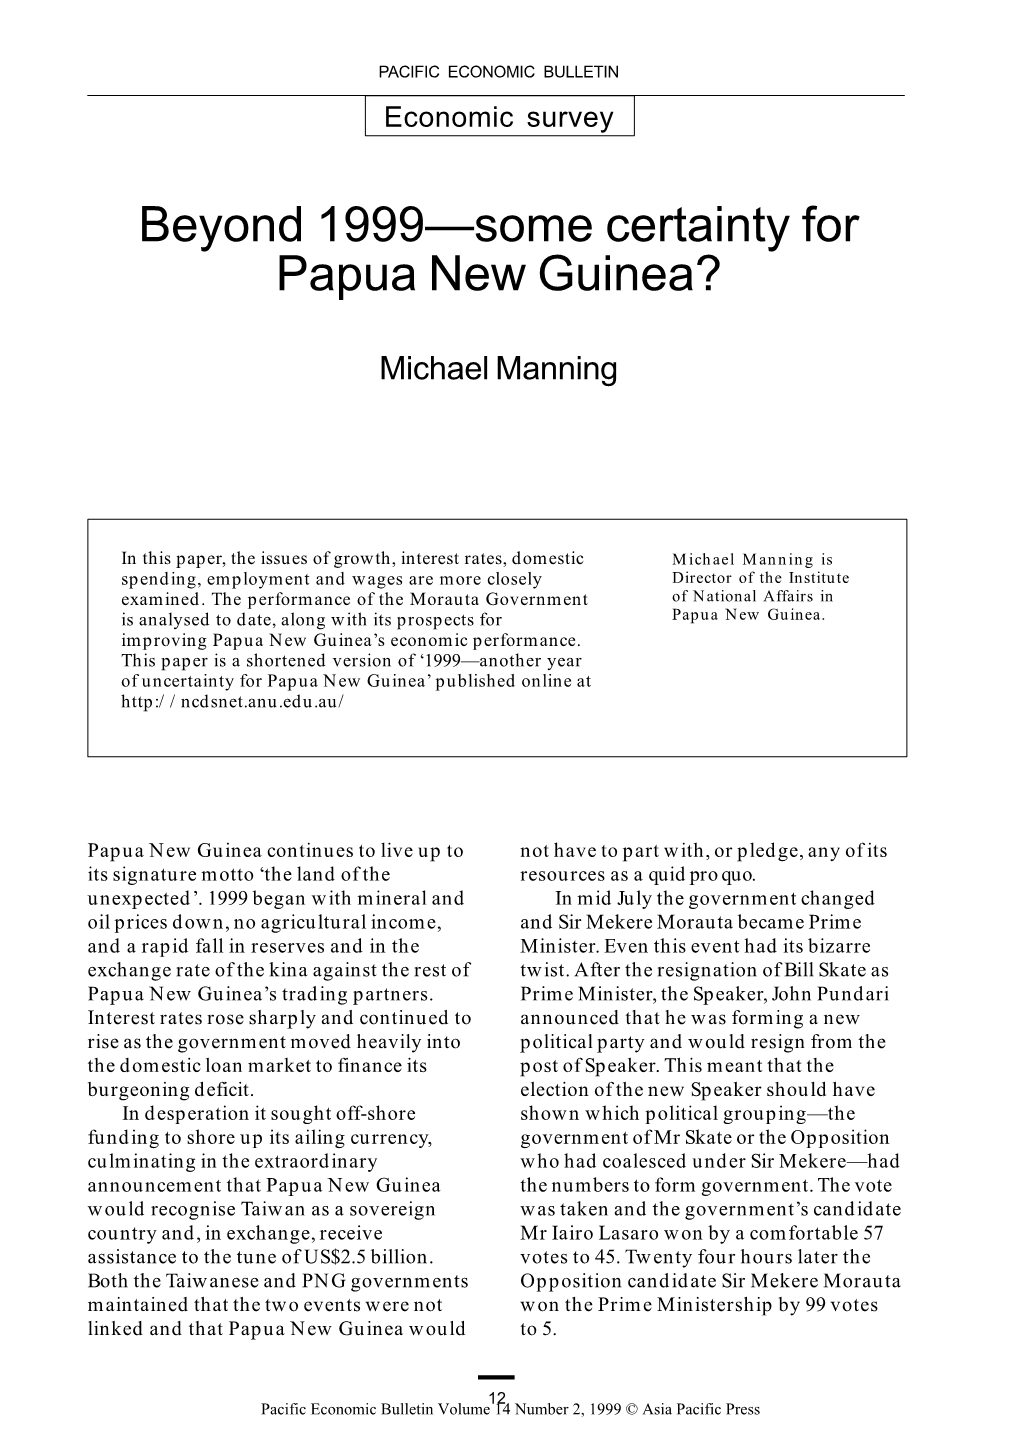 Beyond 1999—Some Certainty for Papua New Guinea?